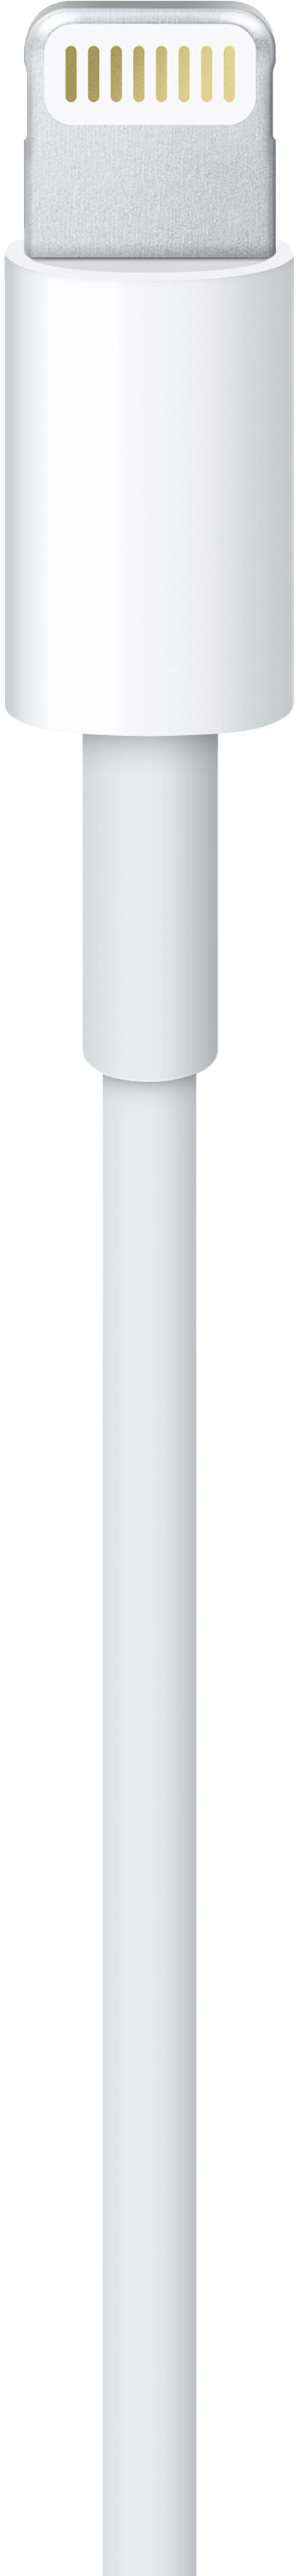 Apple 3.3 Foot Lightning to USB Cable White MUQW3AM/A - Best Buy